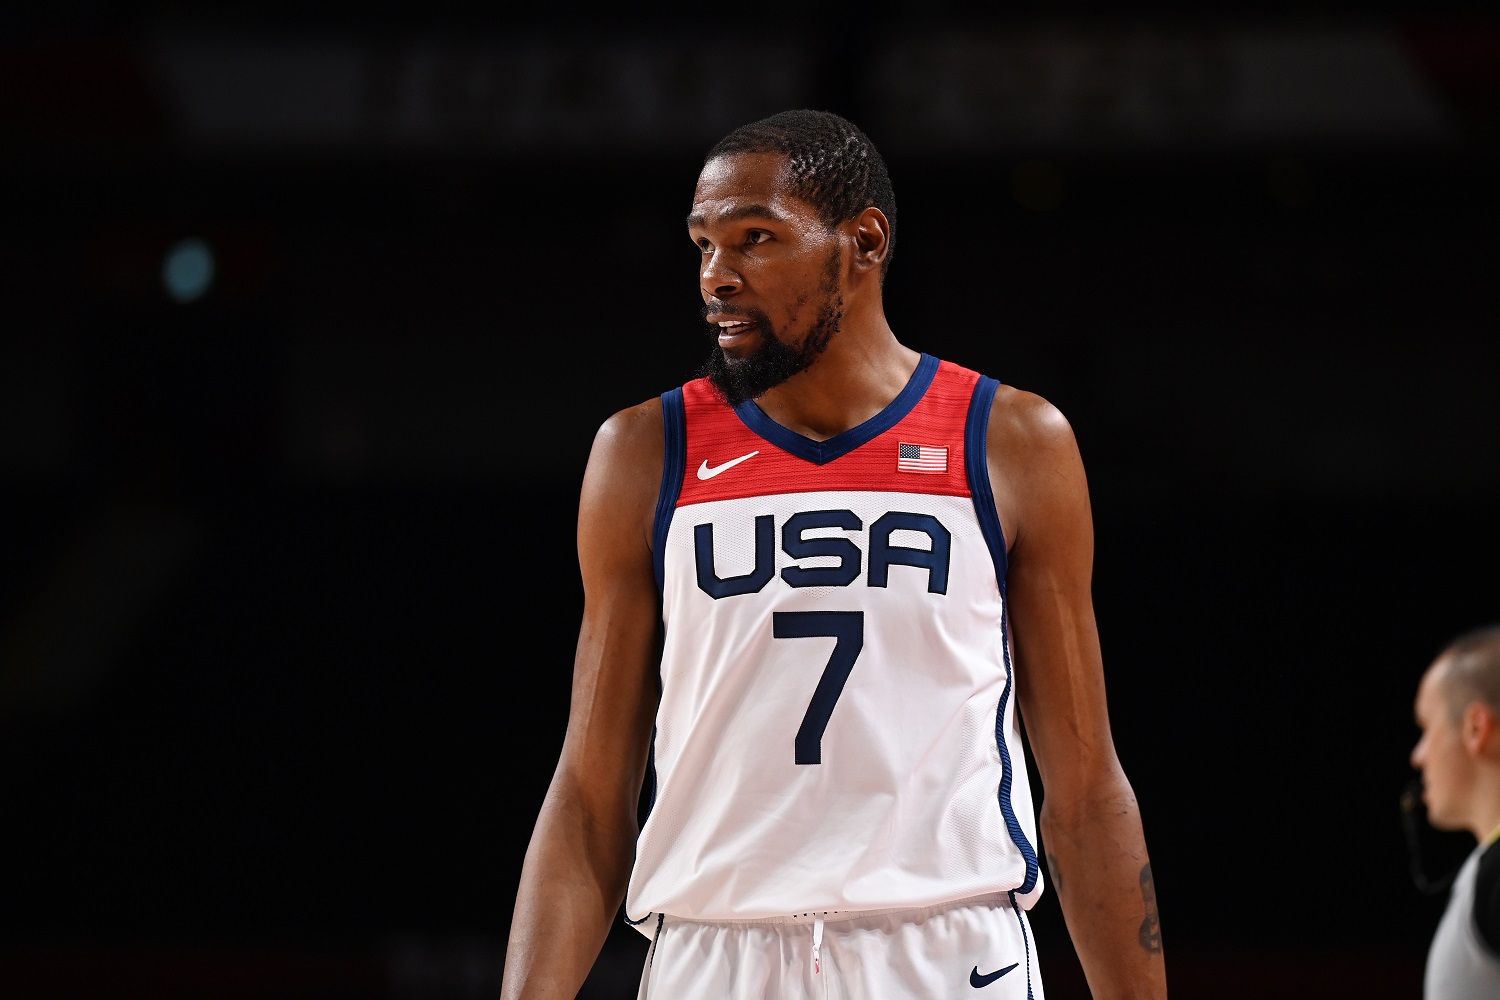 Kevin Durant looks on against Iran during a Group A game at the Tokyo Olympic Games at Saitama Super Arena in Saitama, Japan. | Matthias Hangst/Getty Images